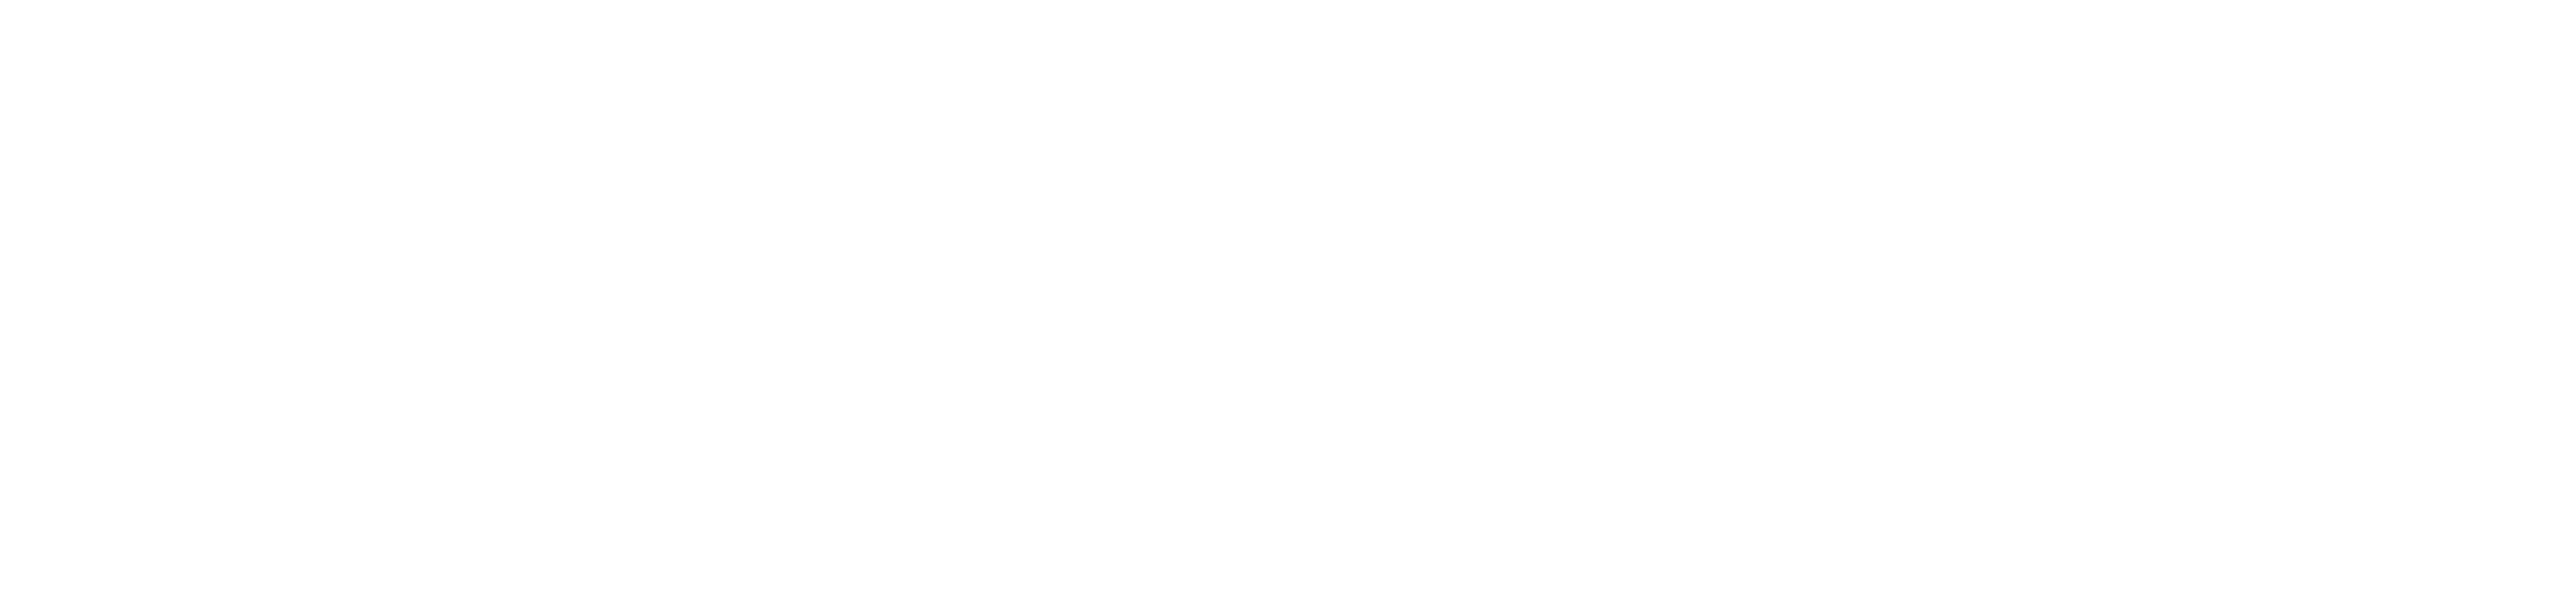 PERIL | Polarization & Extremism<br>Research & Innovation Lab